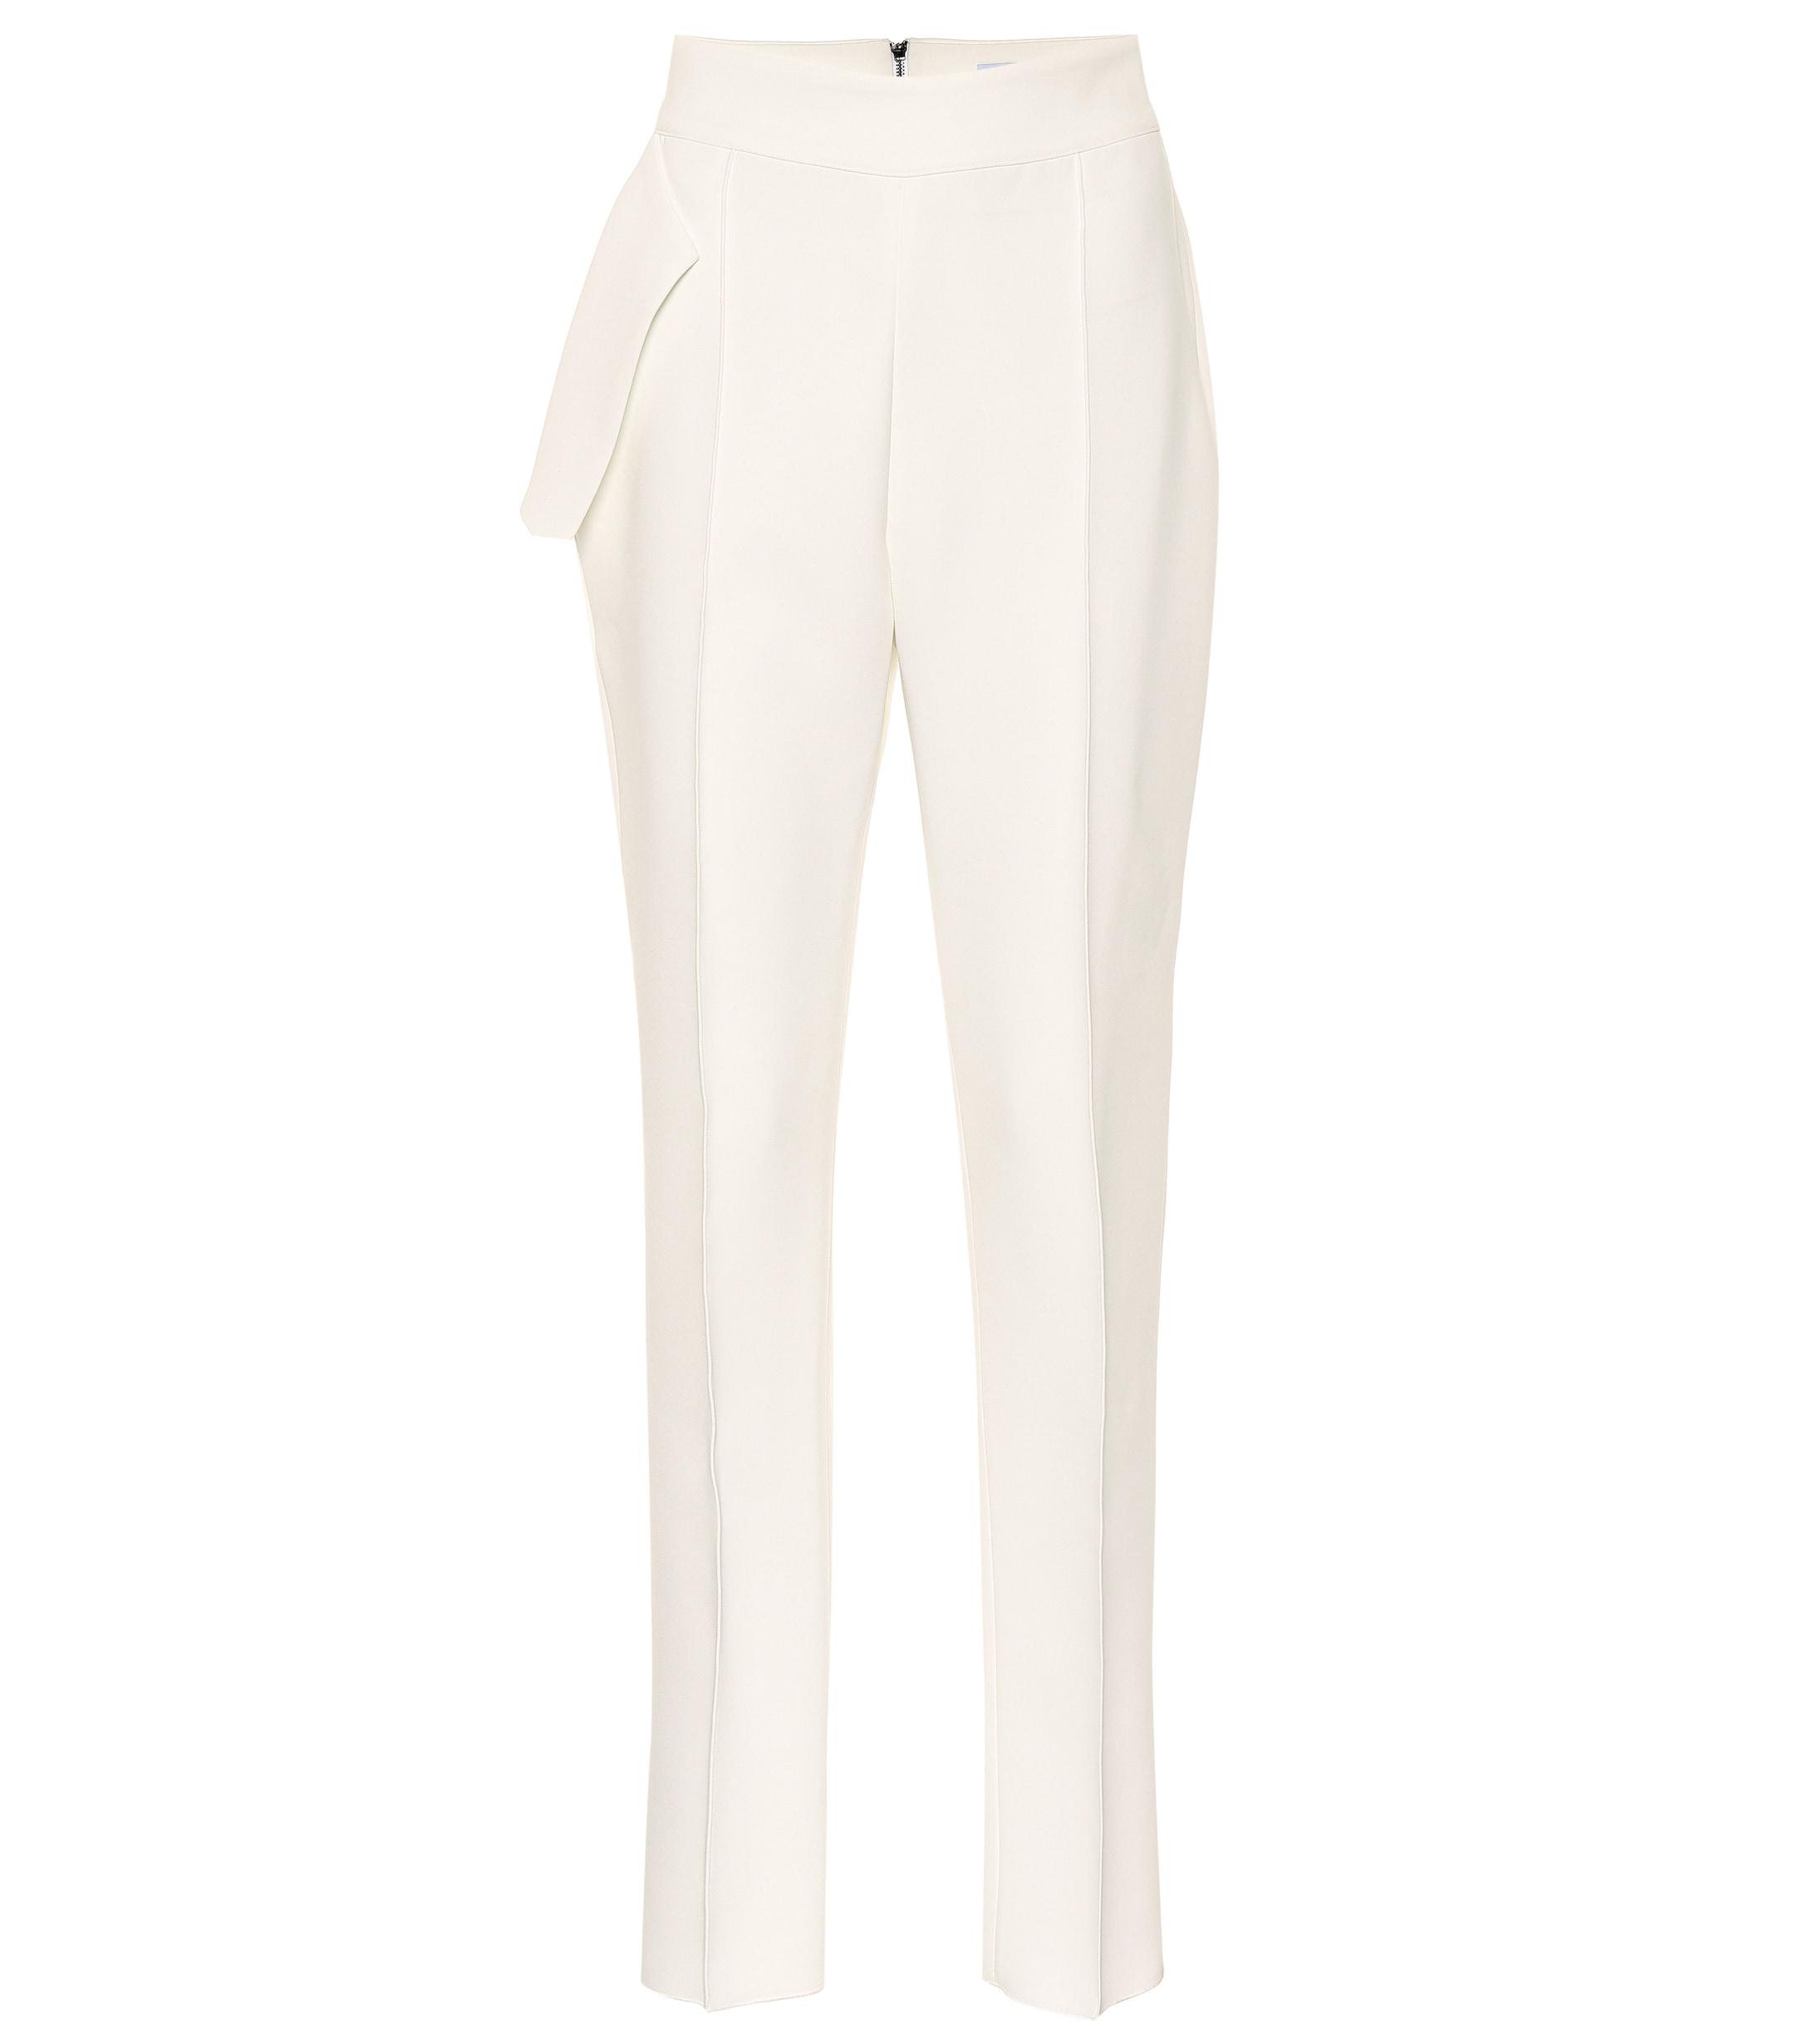 Maticevski Toreador High-rise Straight Pants in White - Lyst